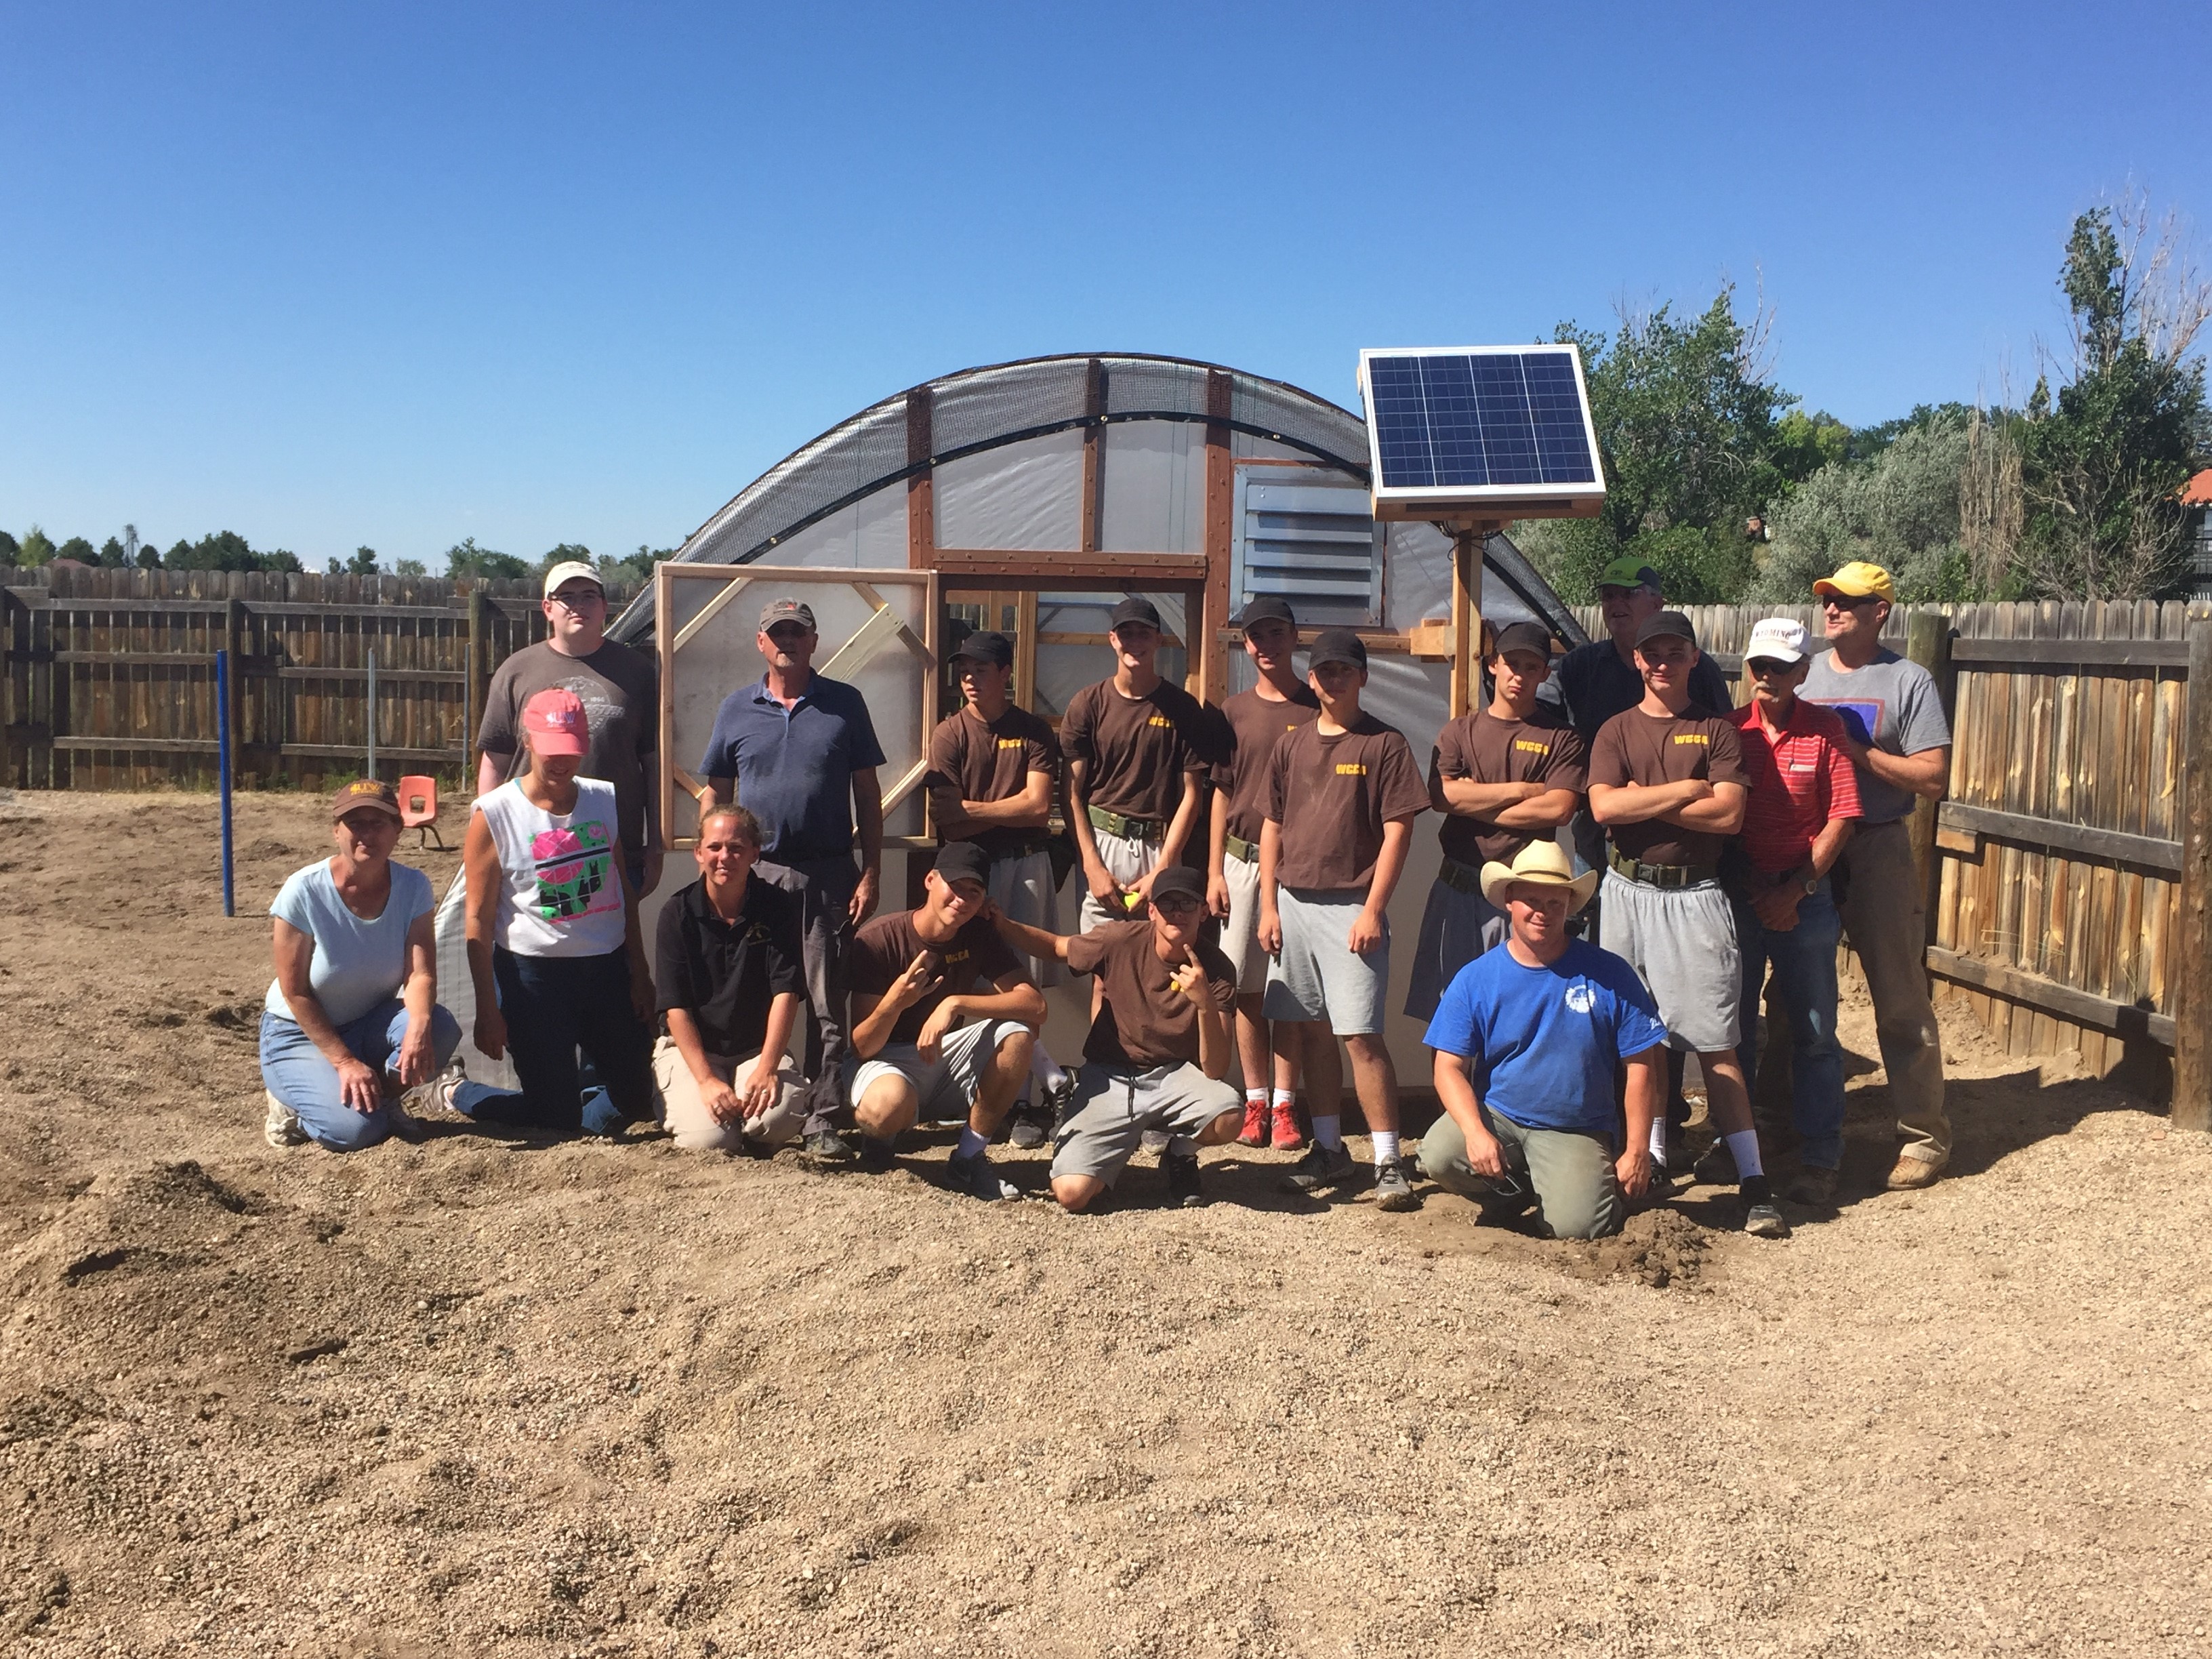 Participants who built the hoop houses